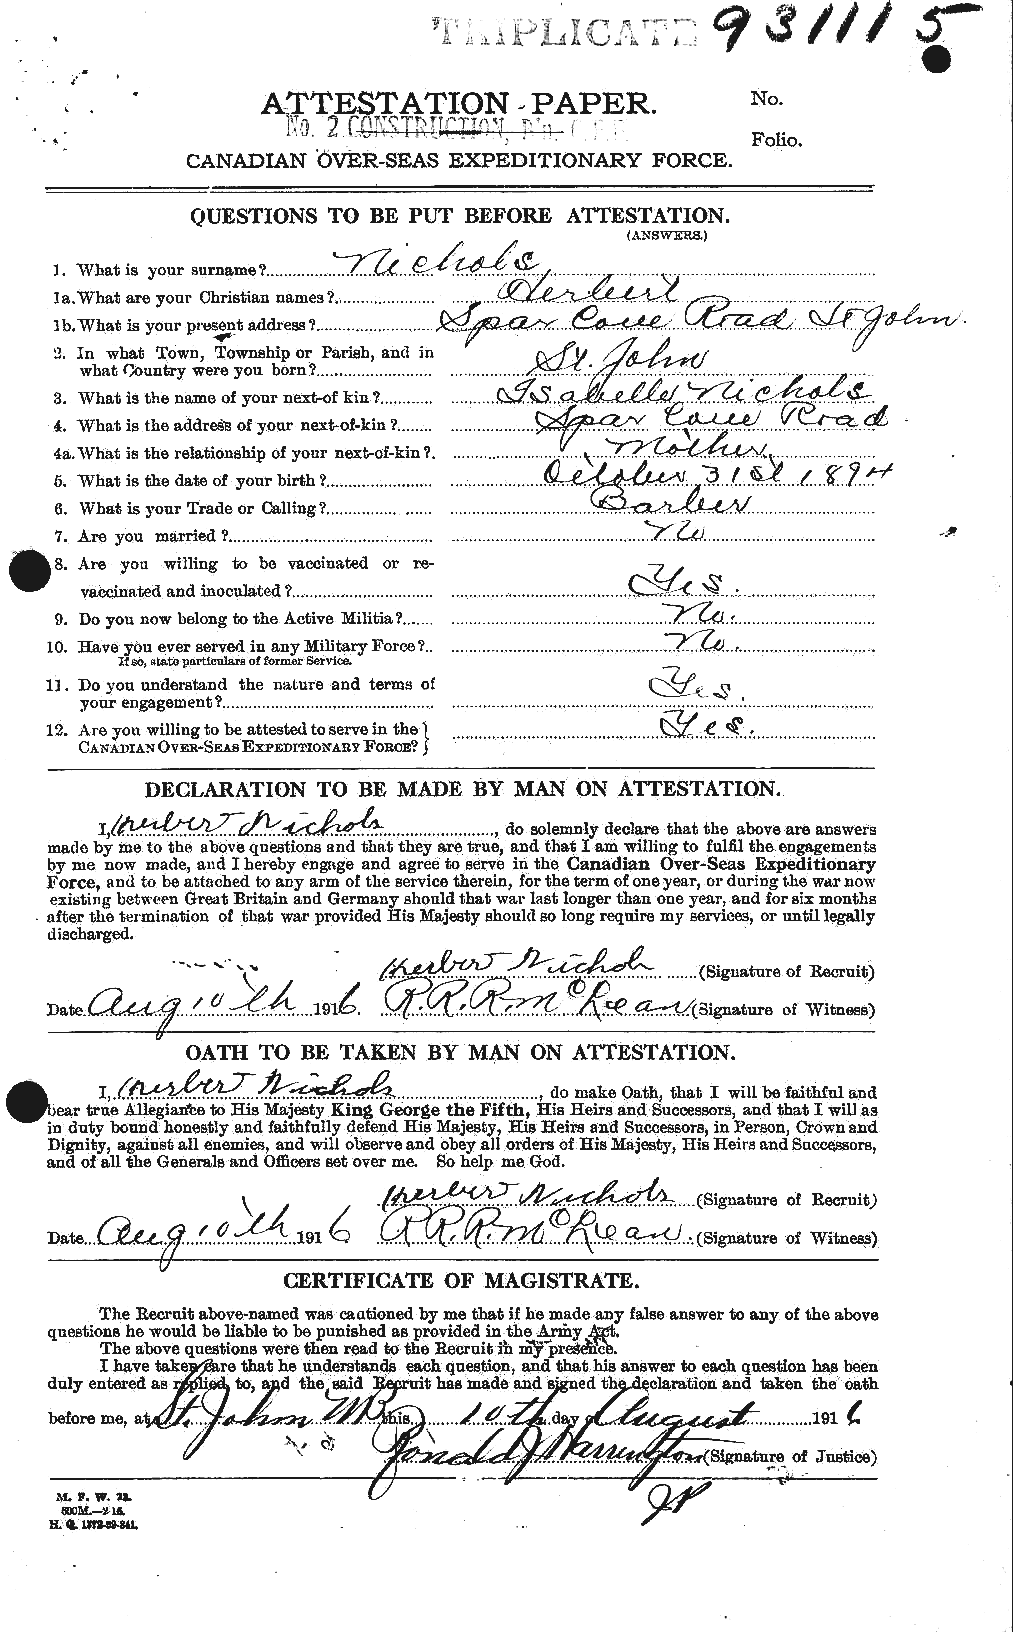 Personnel Records of the First World War - CEF 550991a